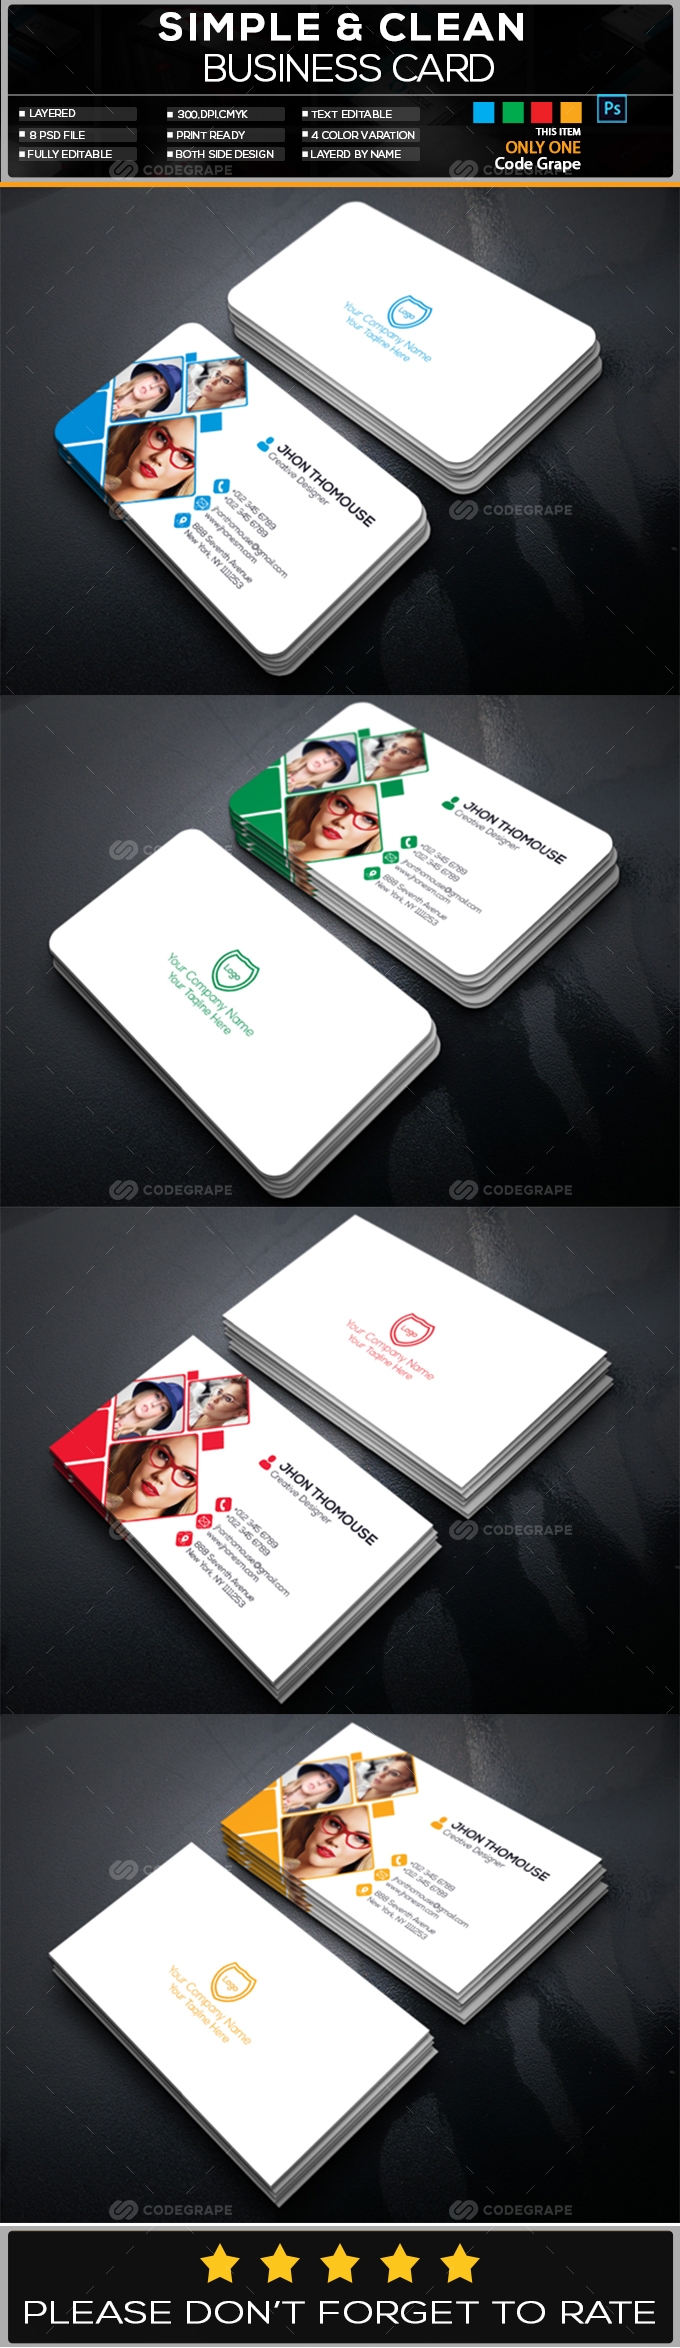 Photography Business Card Vol - 3